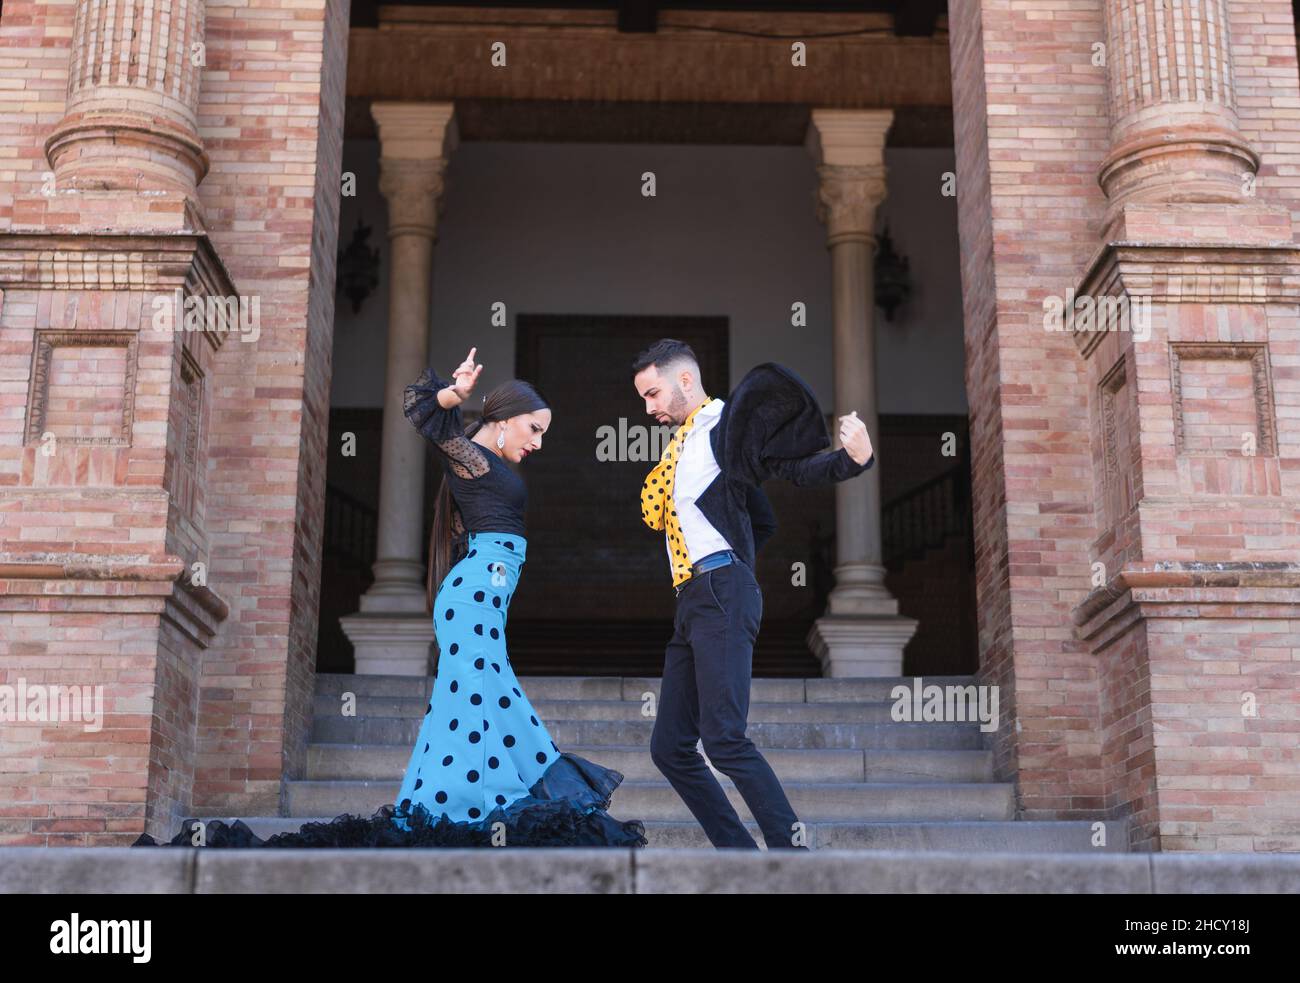 Two flamenco dancers performing in stairs of a building Stock Photo